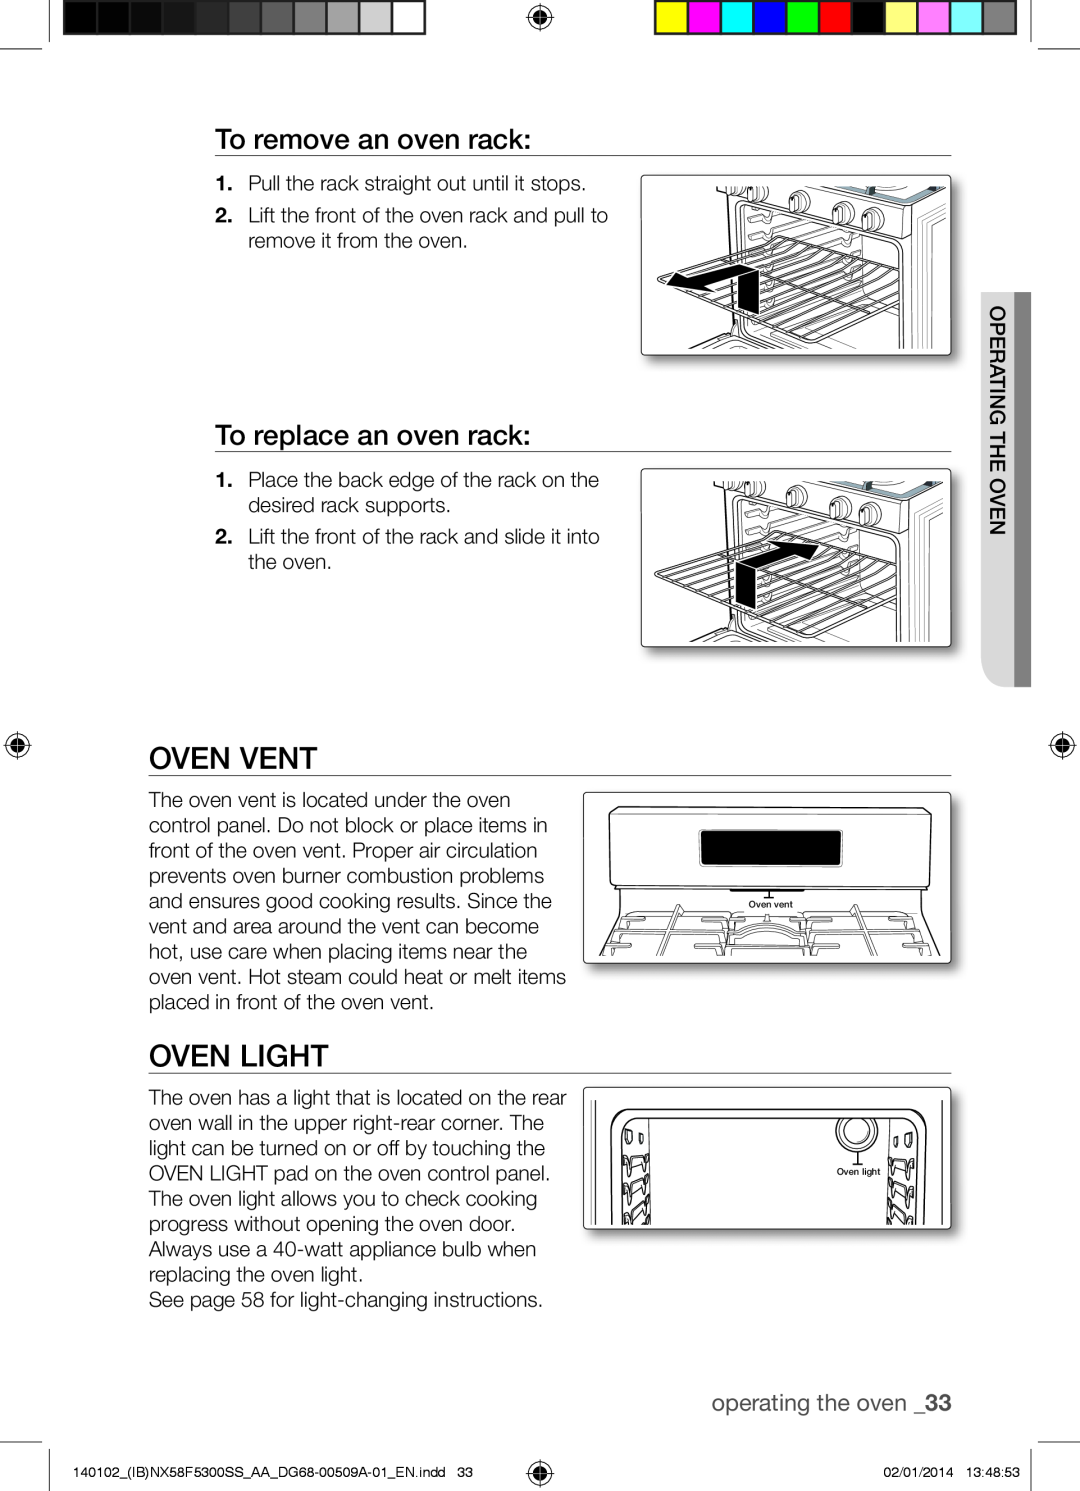 Samsung NX58F5500SW user manual Oven Vent, Oven Light, To remove an oven rack, To replace an oven rack, operating the oven 